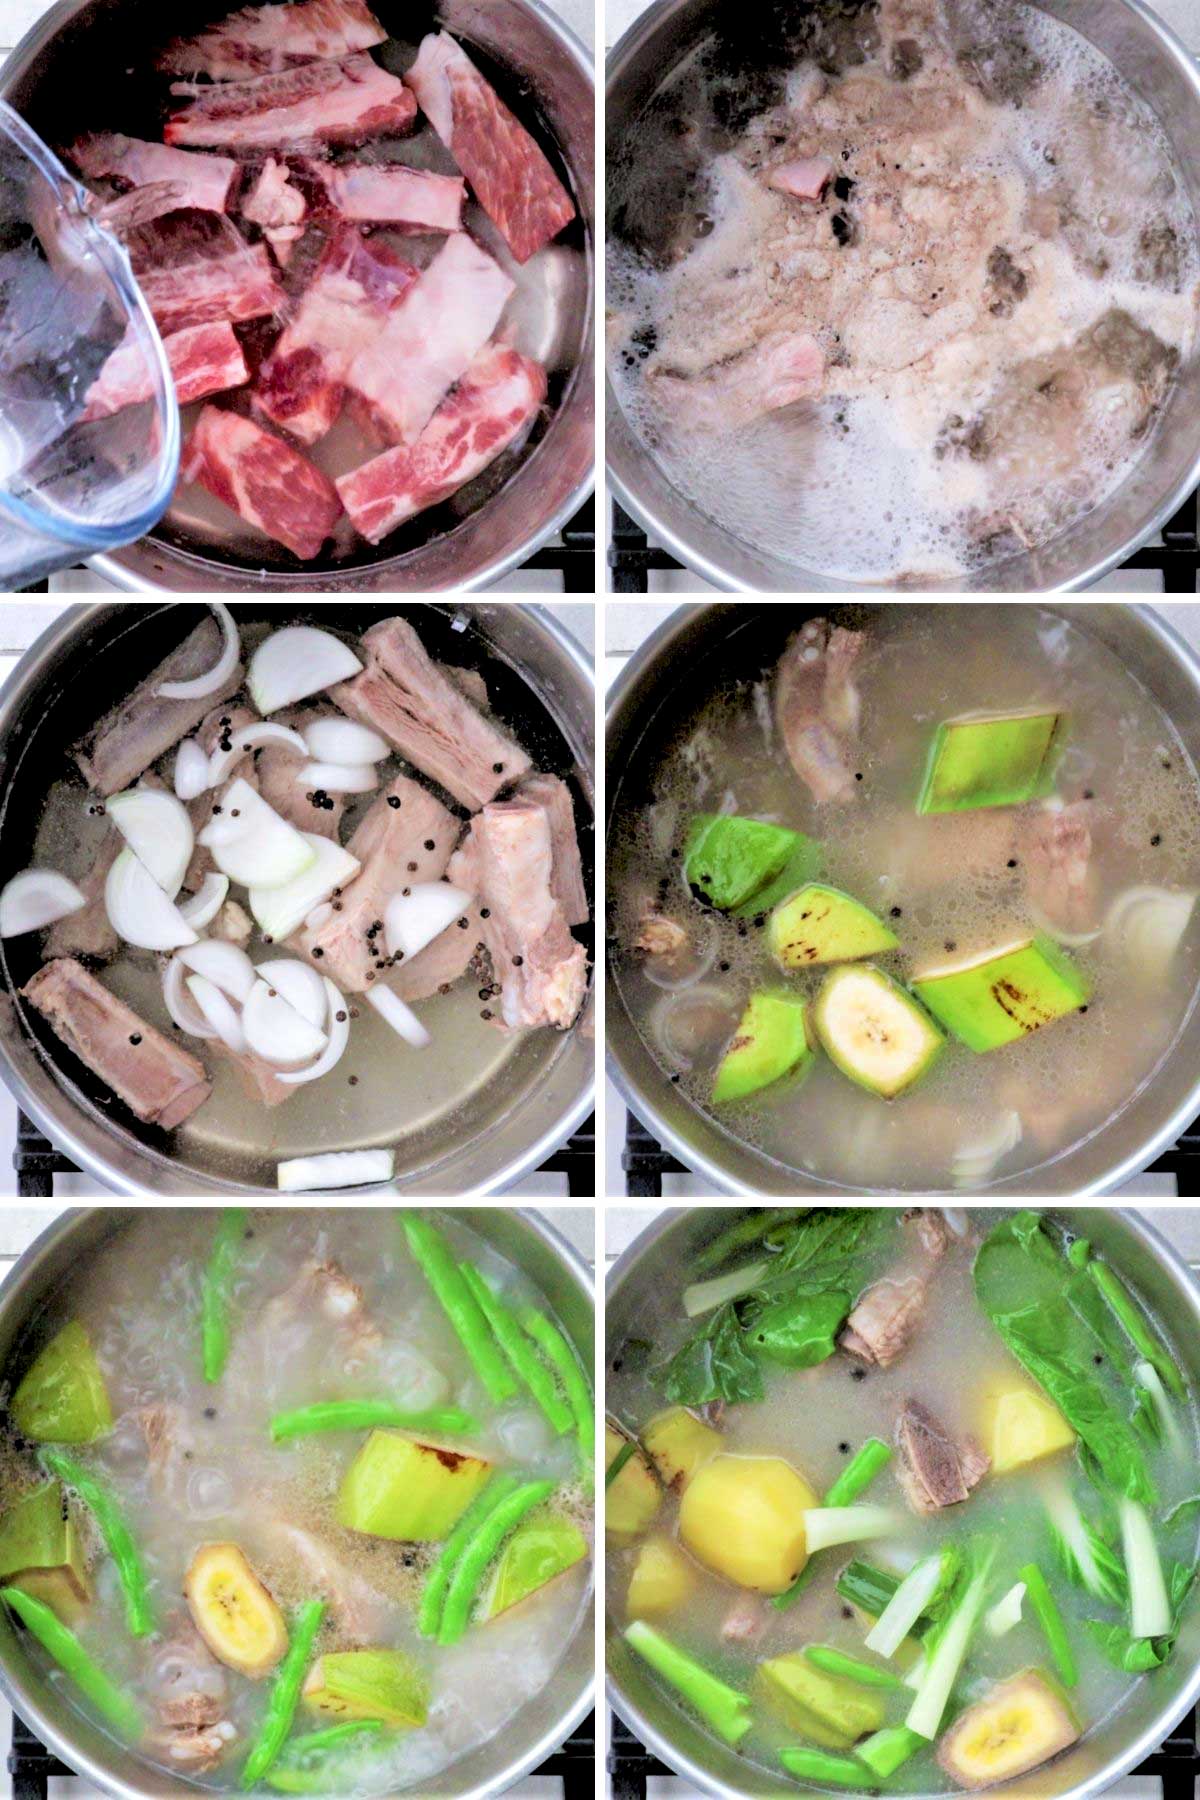 Steps on how to cook Nilagang baboy.